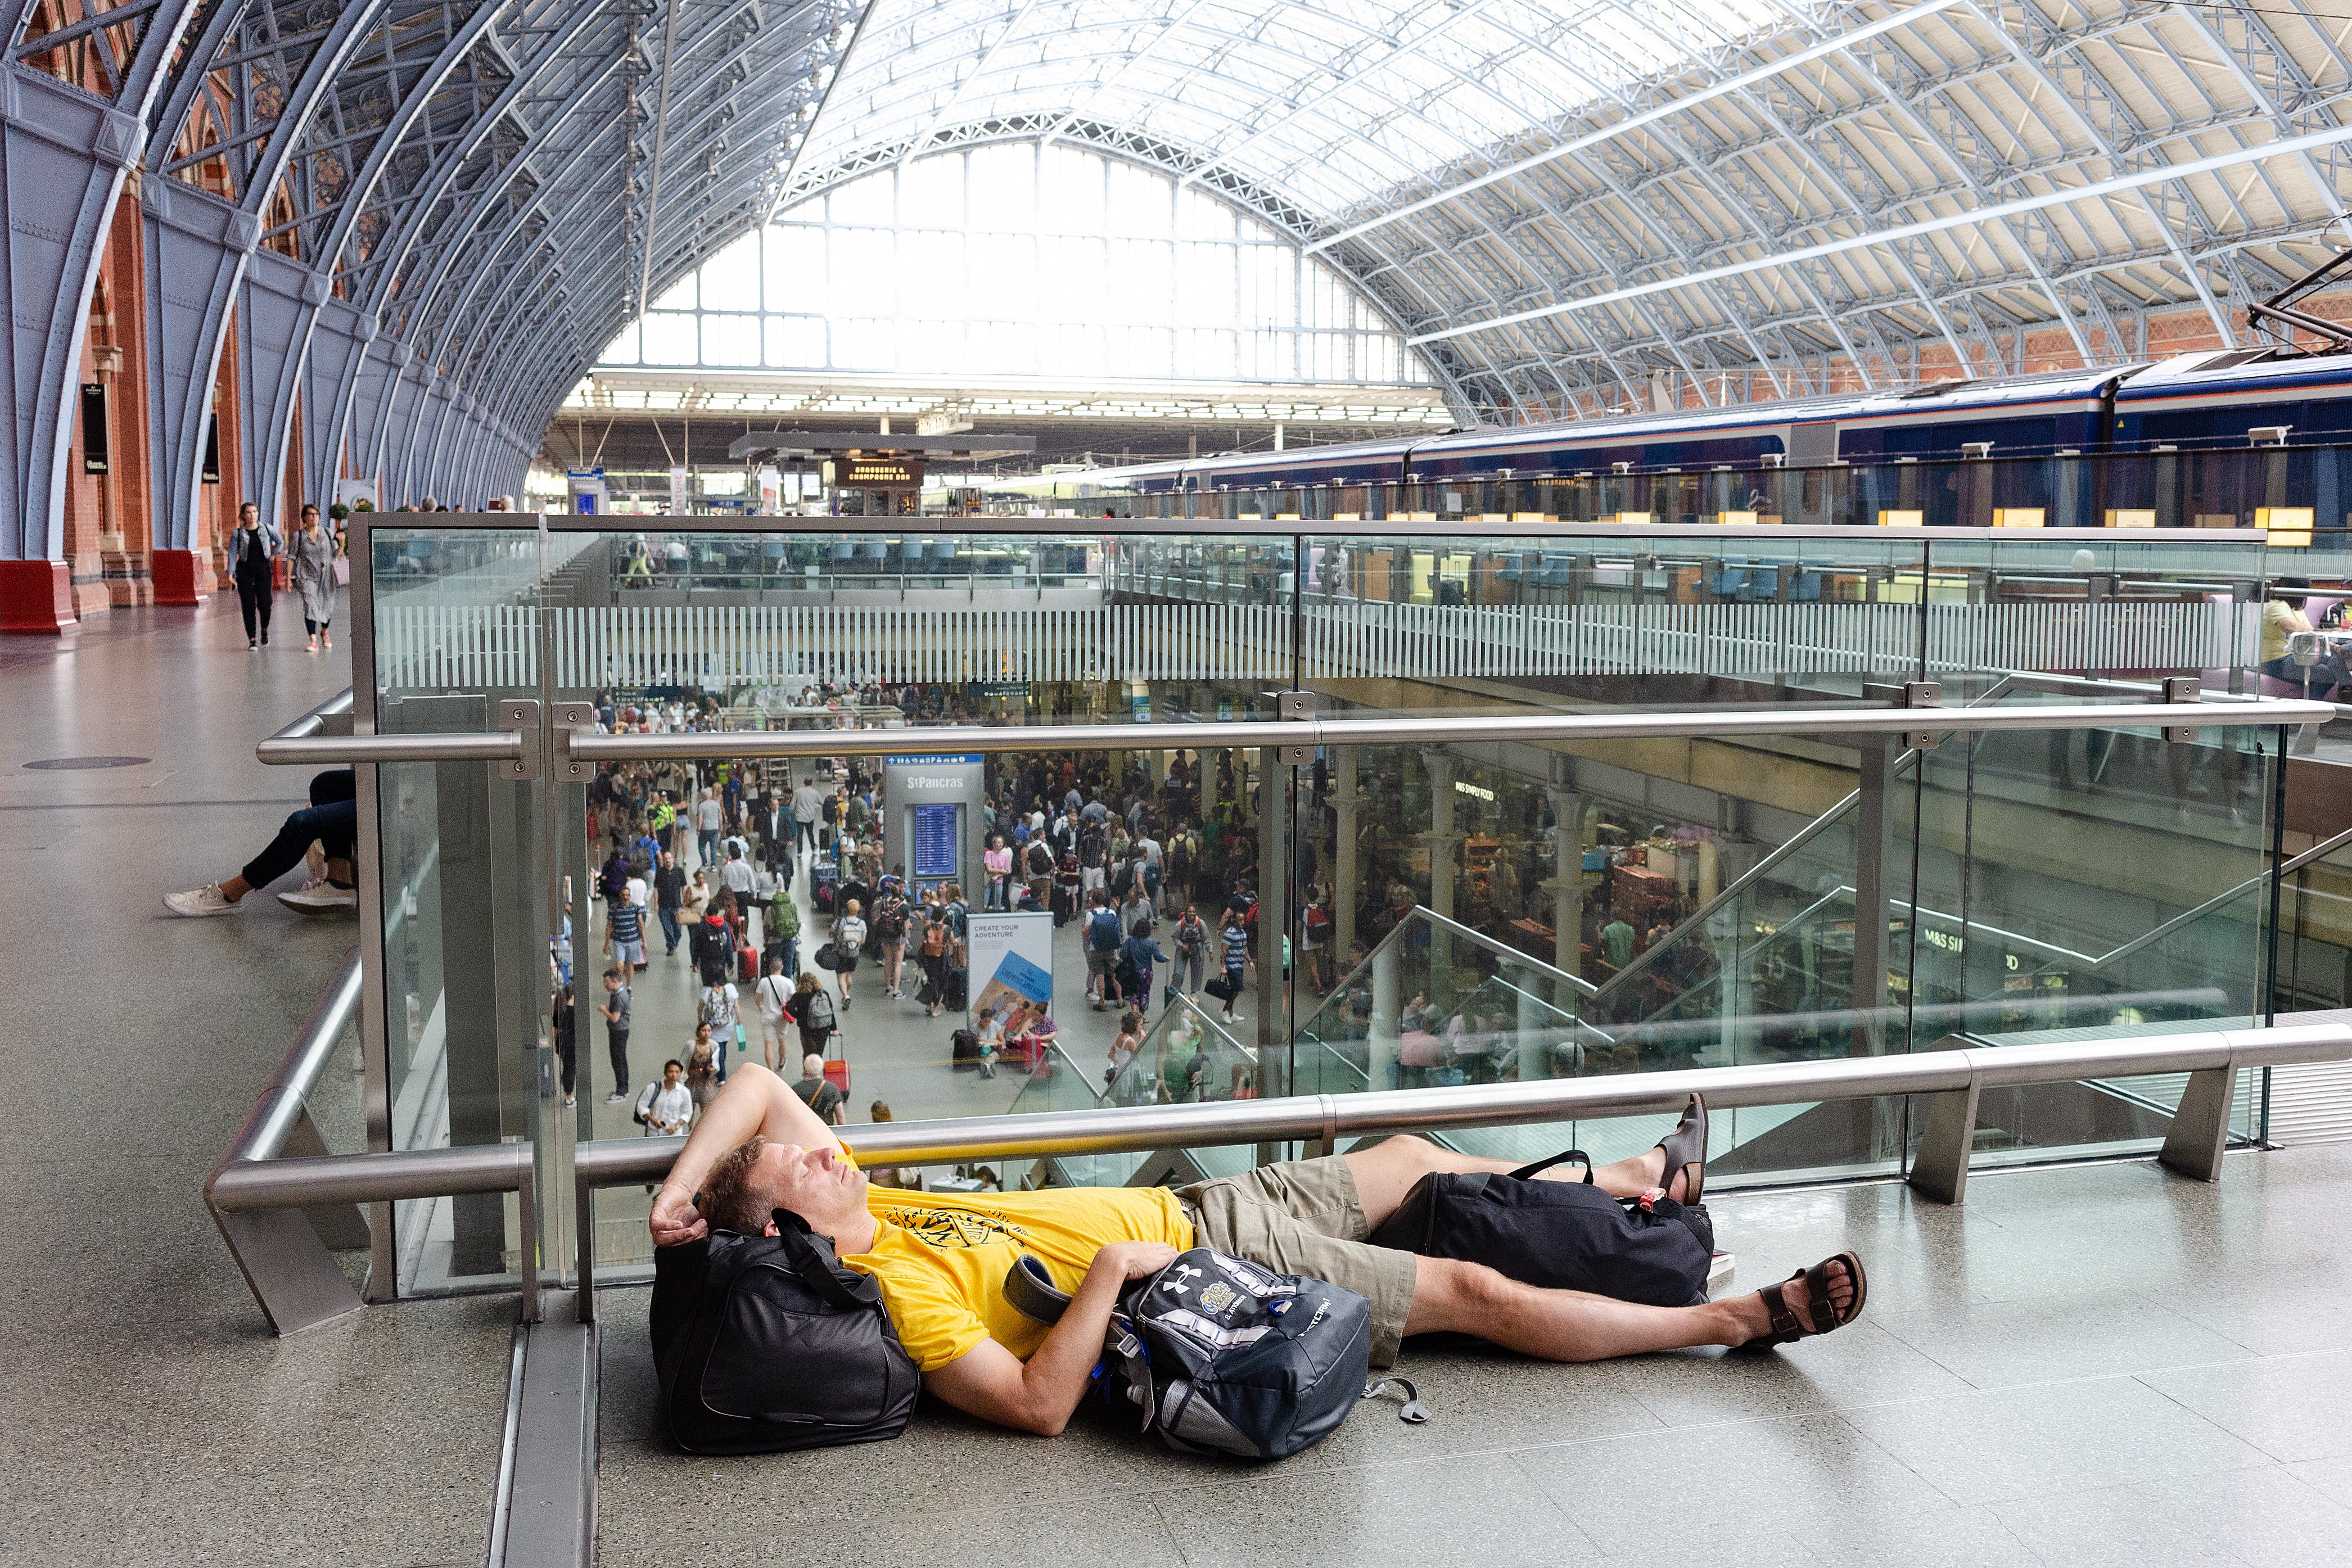 A 2019 heatwave in Europe, which disrupted travel on the Eurostar, was made up to 100 times more likely by the climate crisis